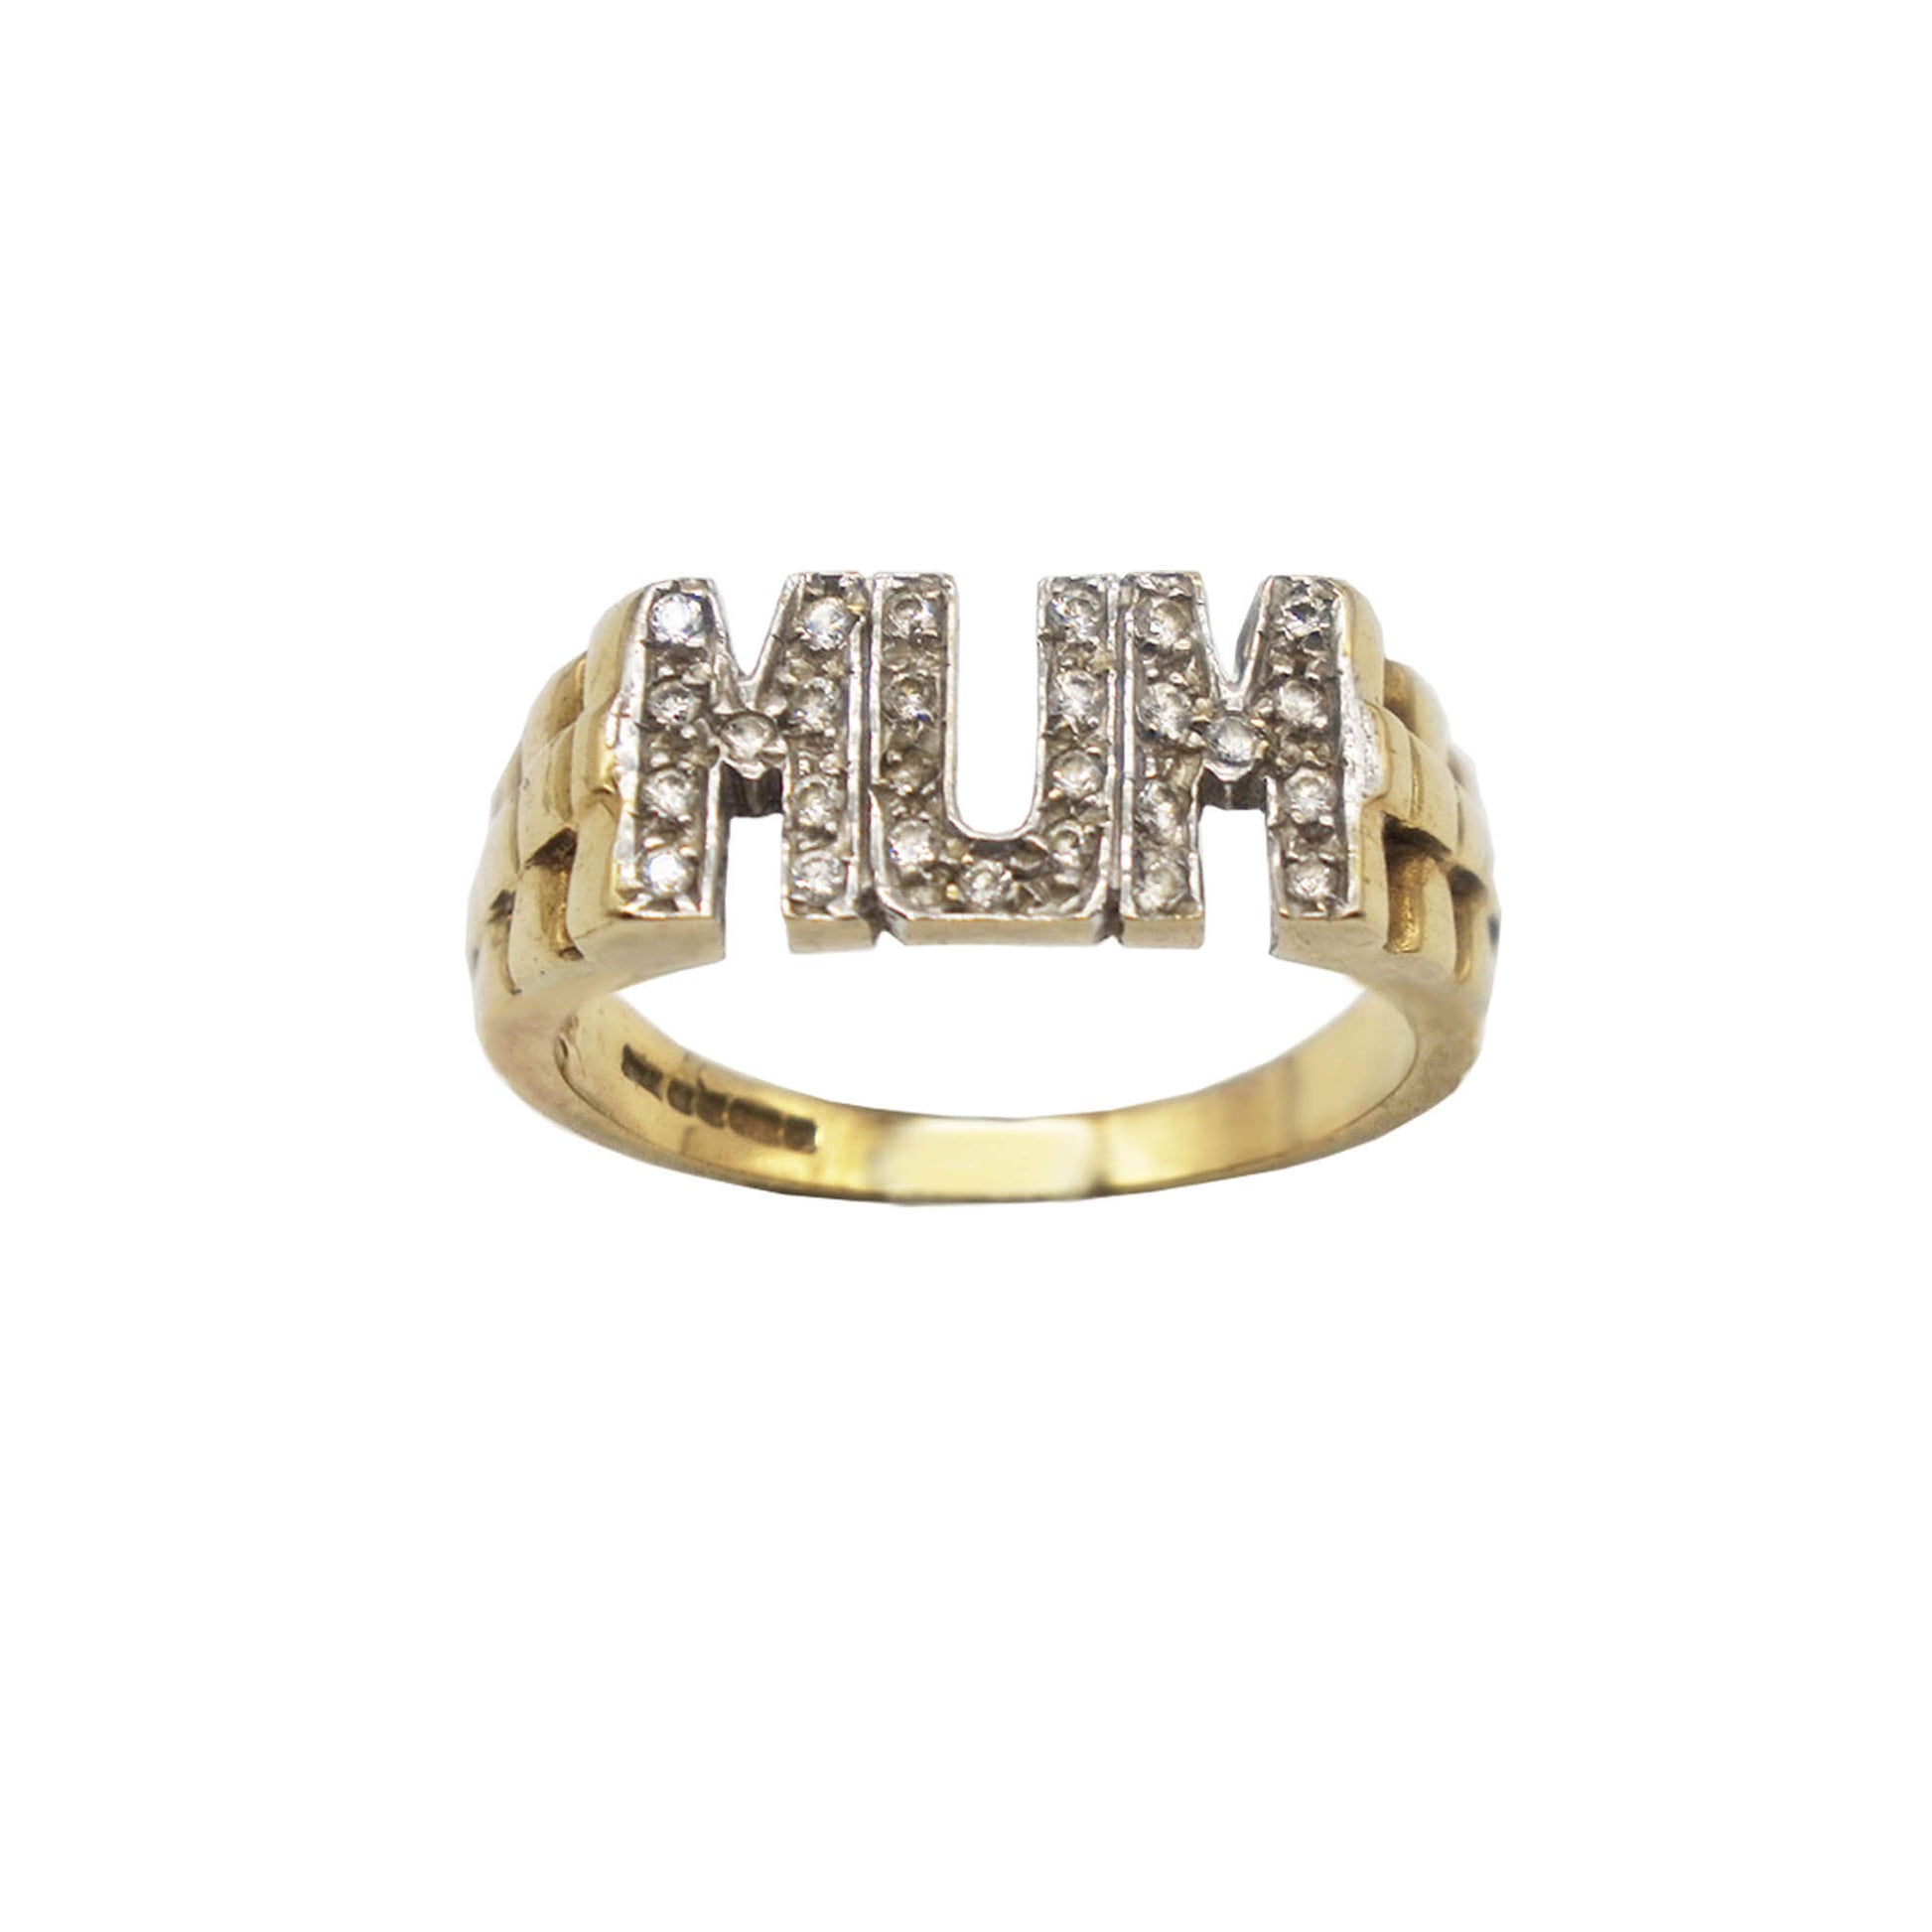 Vintage 9K Gold Mum  ring- pave capital letters with cubic zirconia stones, textured band